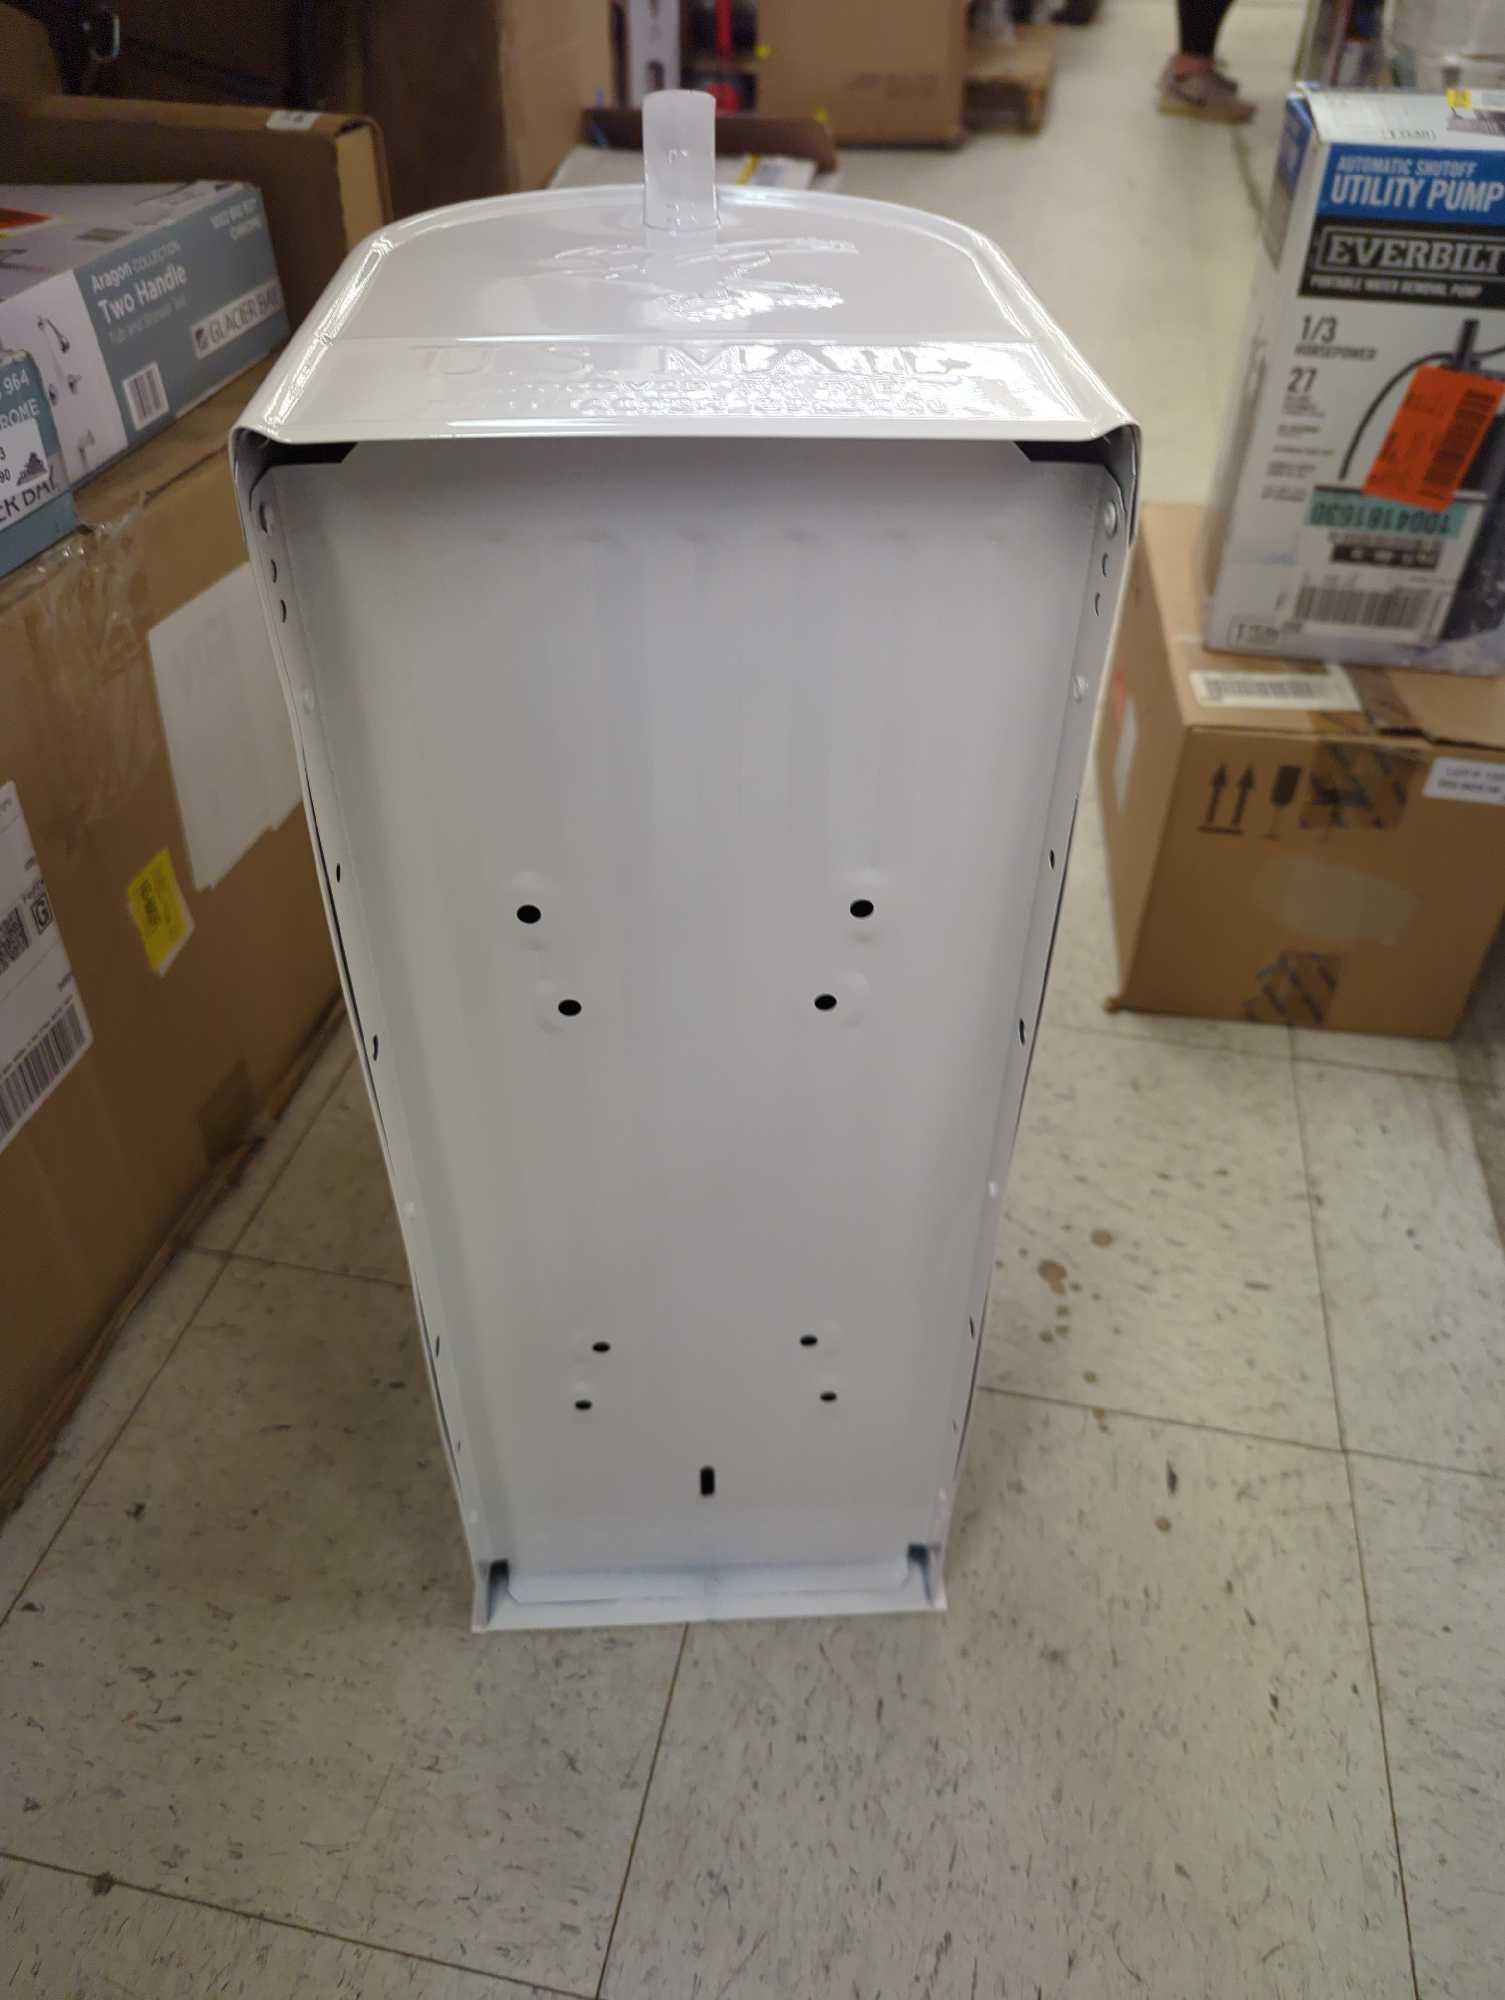 Architectural Mailboxes Elite White, Large, Steel, Post Mount Mailbox, Appears to be New Out of the